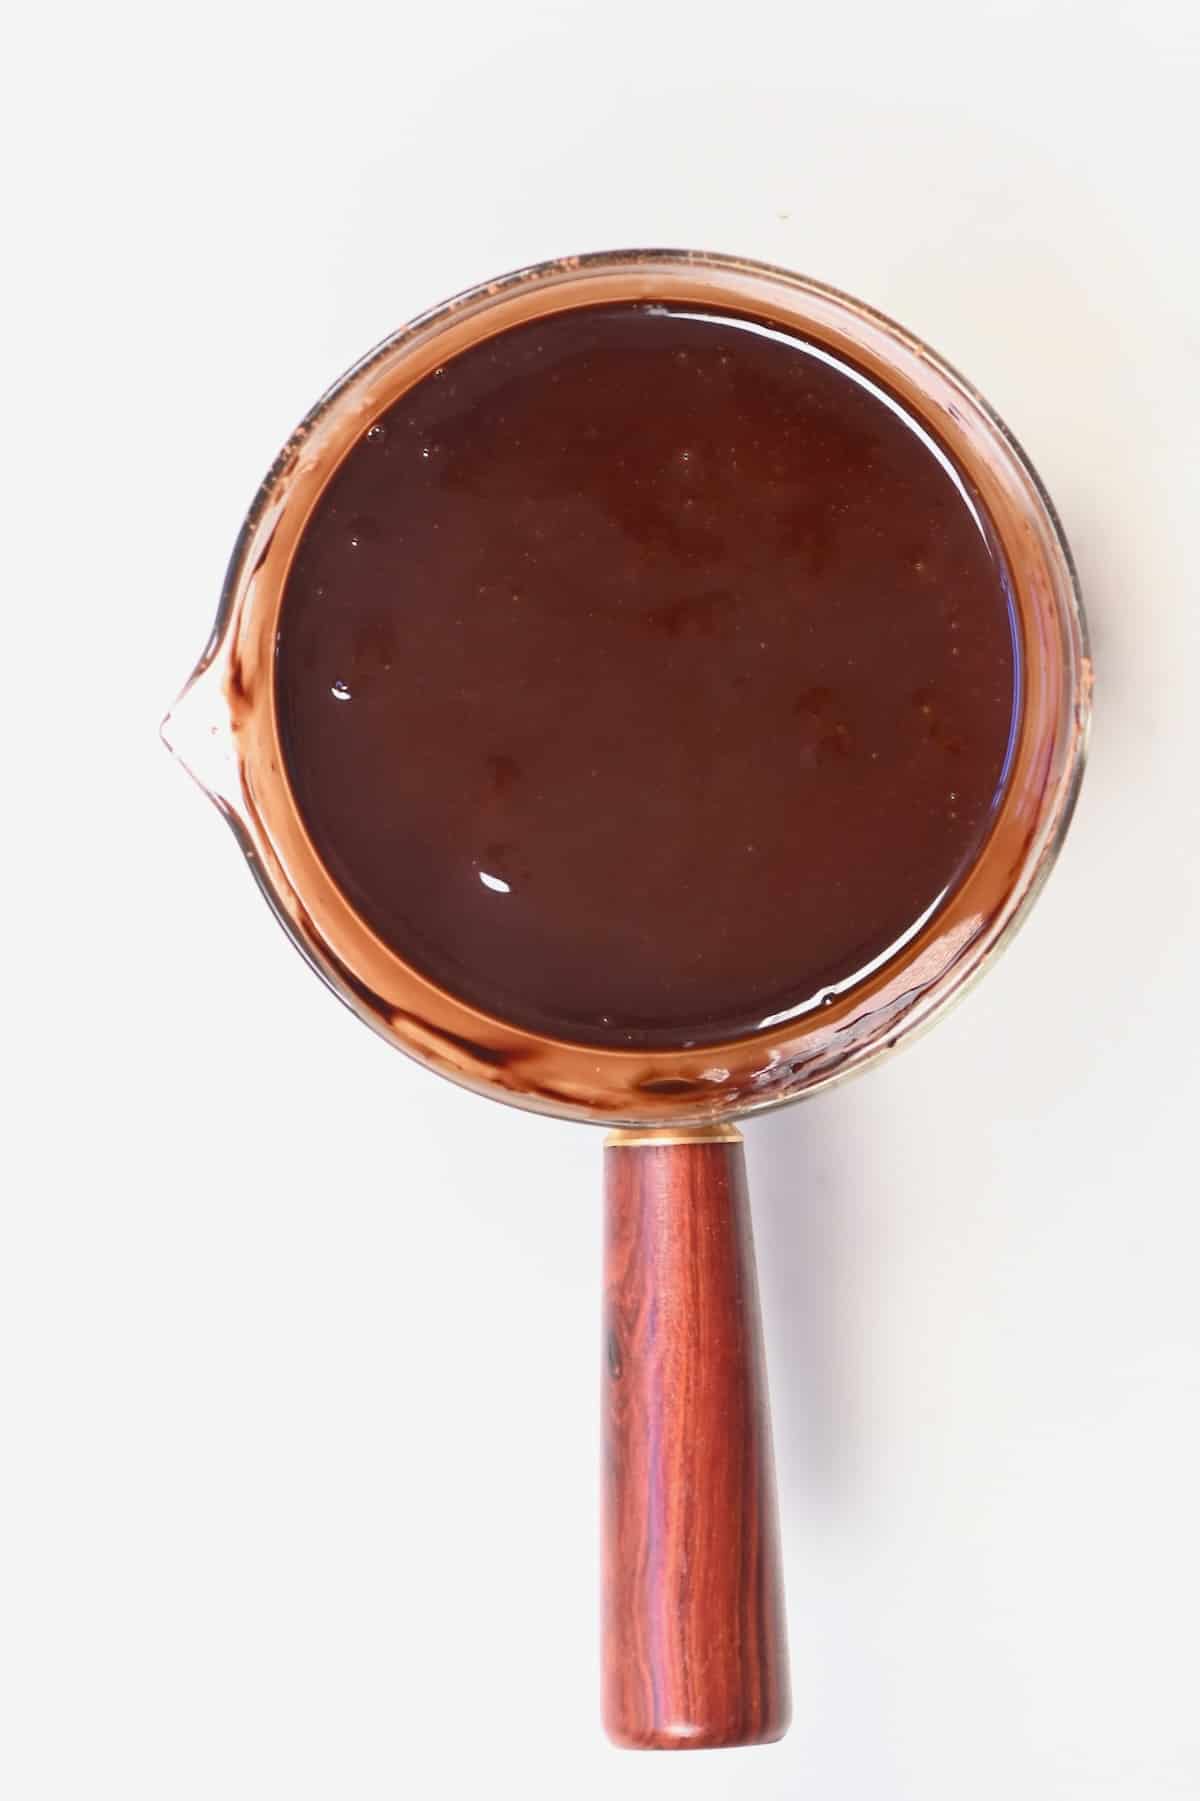 A small pot with homemade chocolate syrup